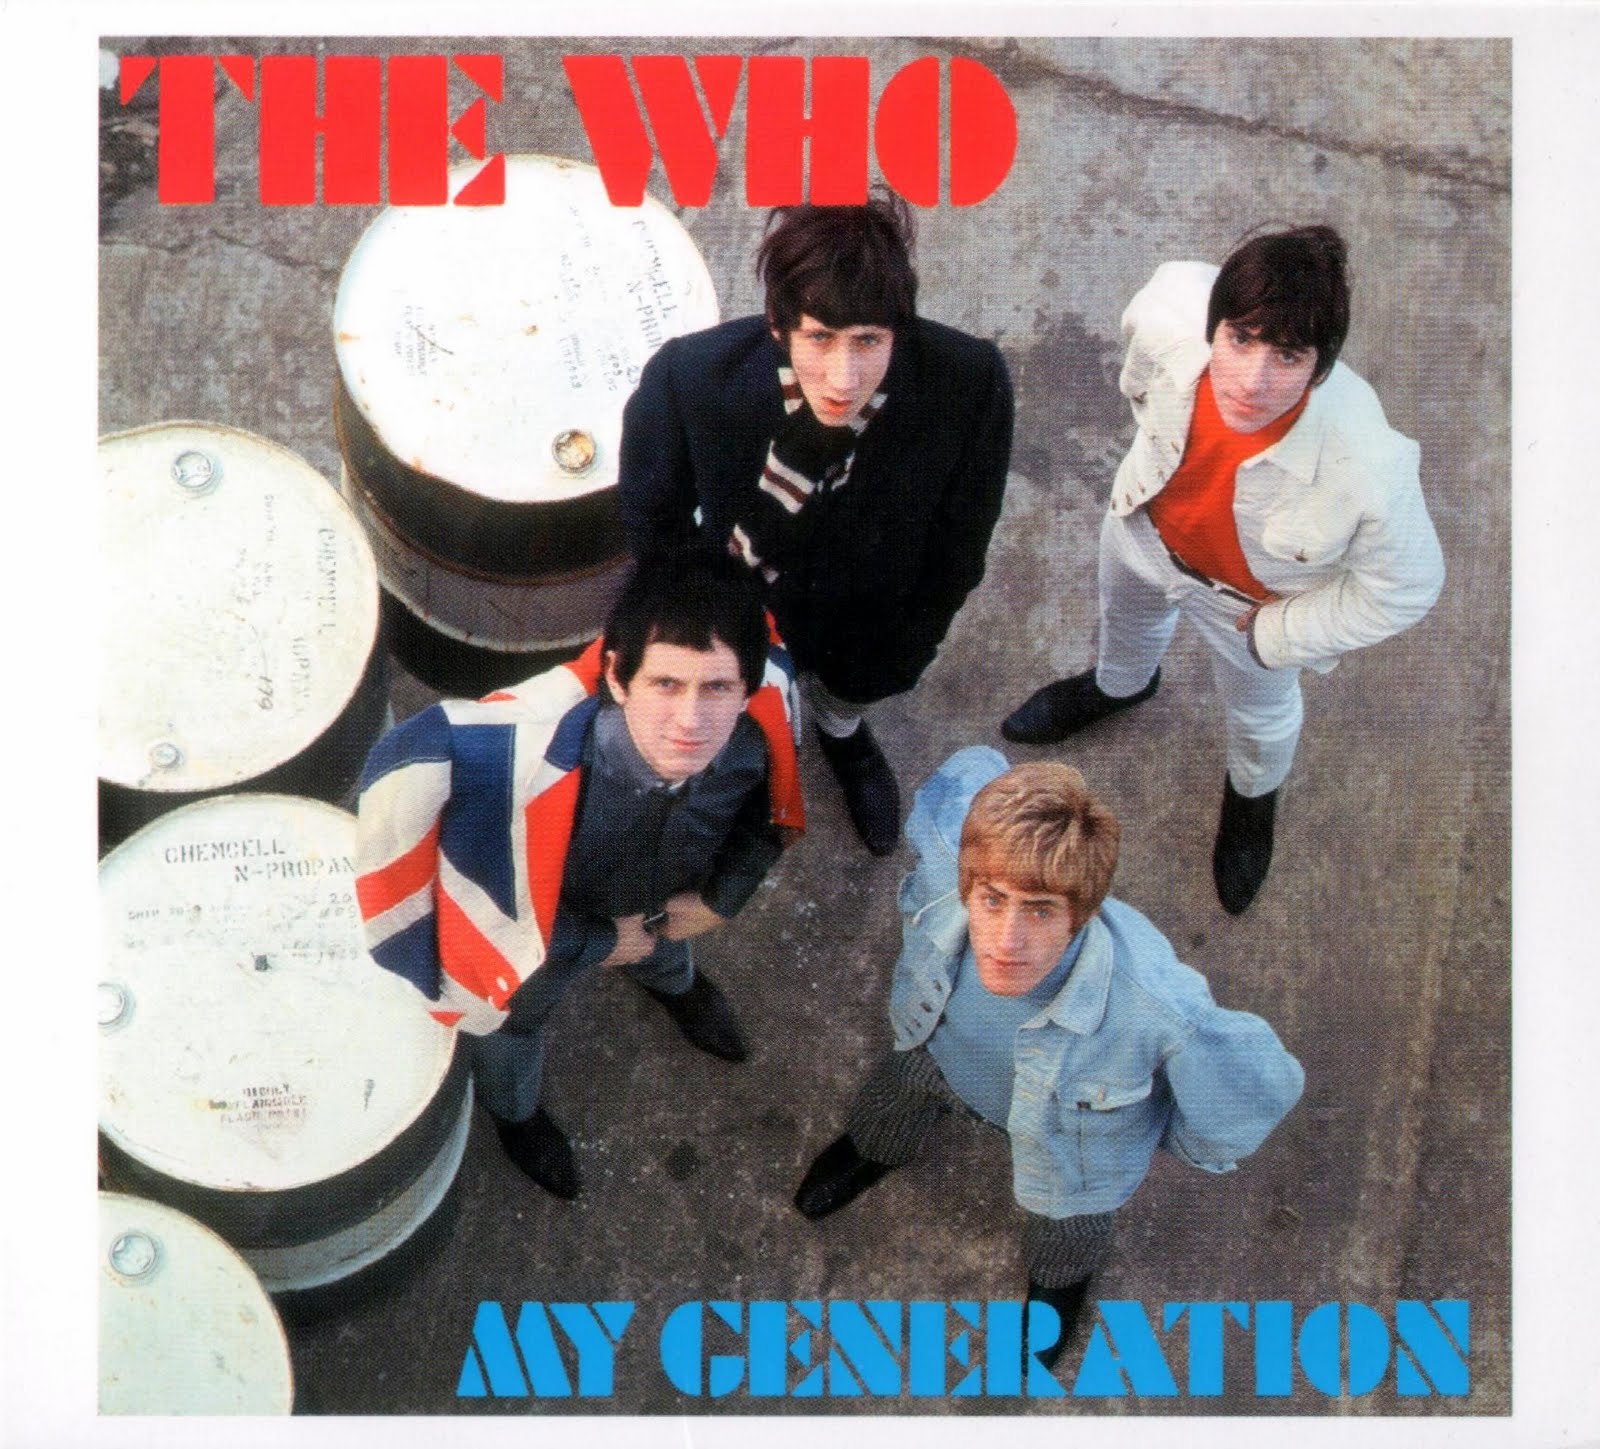 %255BAllCDCovers%255D_who_my_generation_